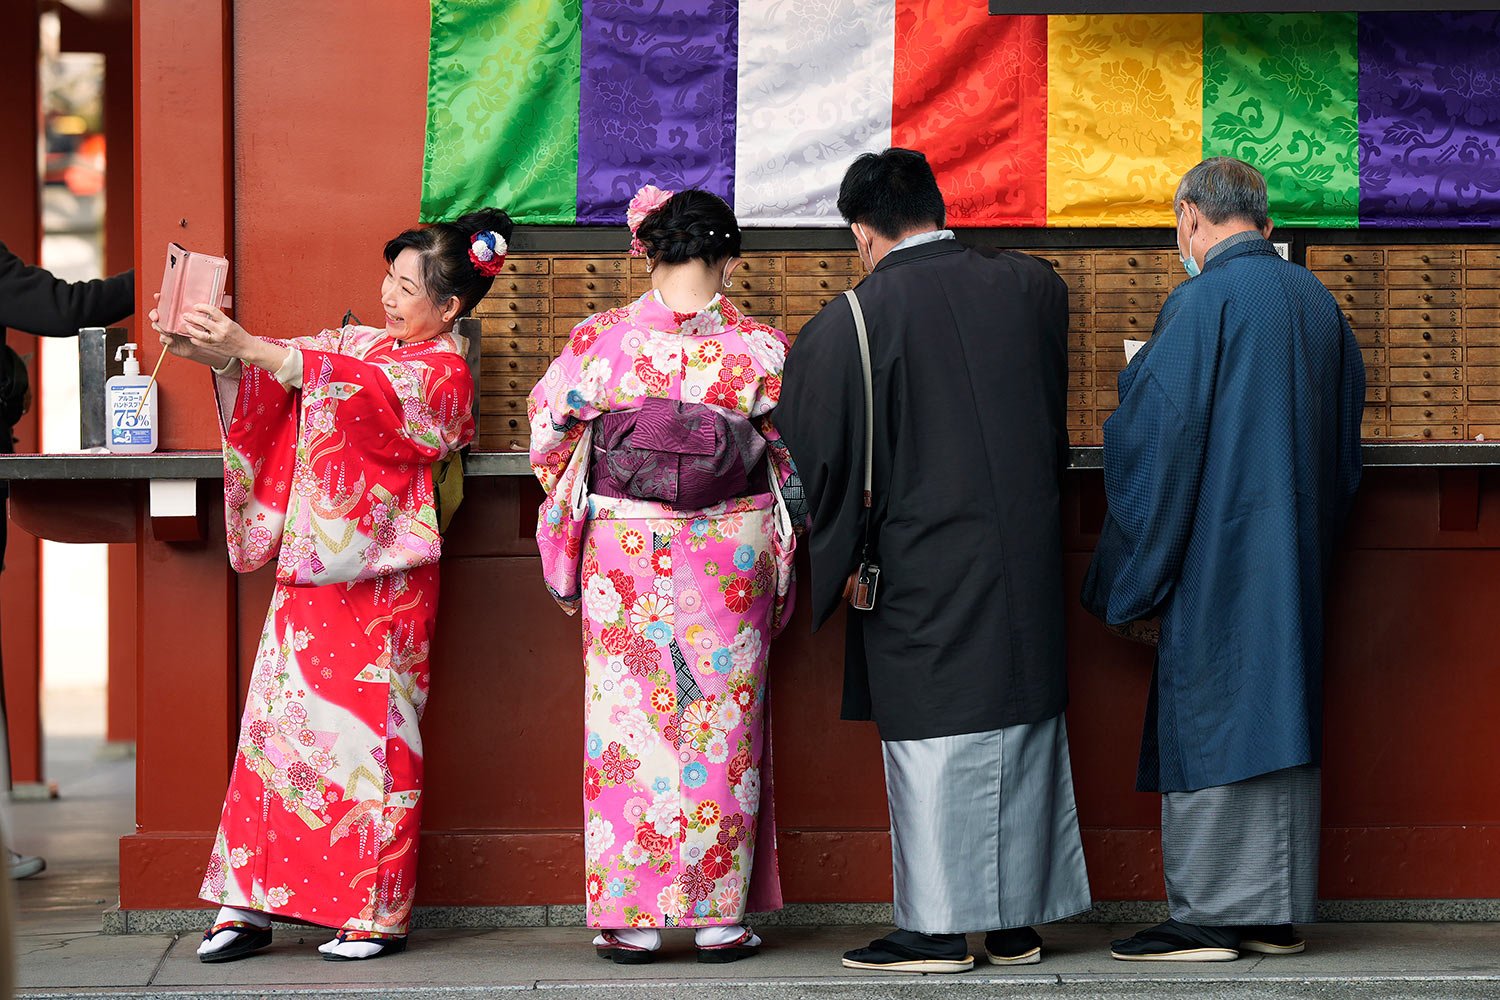  A group of tourists from Singapore wearing traditional Japanese kimonos buy fortune papers as one takes a selfie at Sensoji Buddhist temple in Tokyo, Friday, Jan. 13, 2023. (AP Photo/Hiro Komae) 